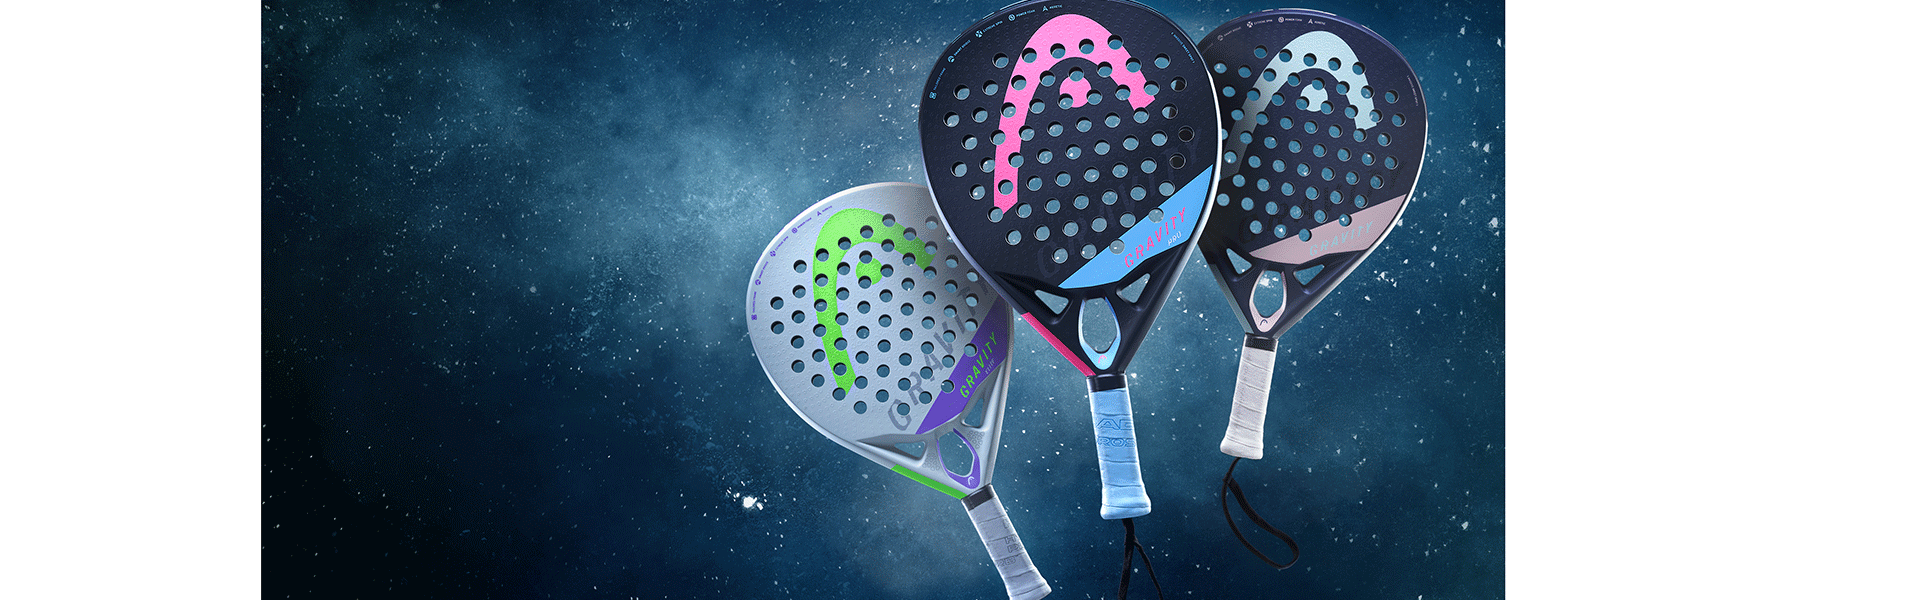 DOMINATE YOUR SHOT WITH THE NEW HEAD GRAVITY PADEL RACQUET SERIES